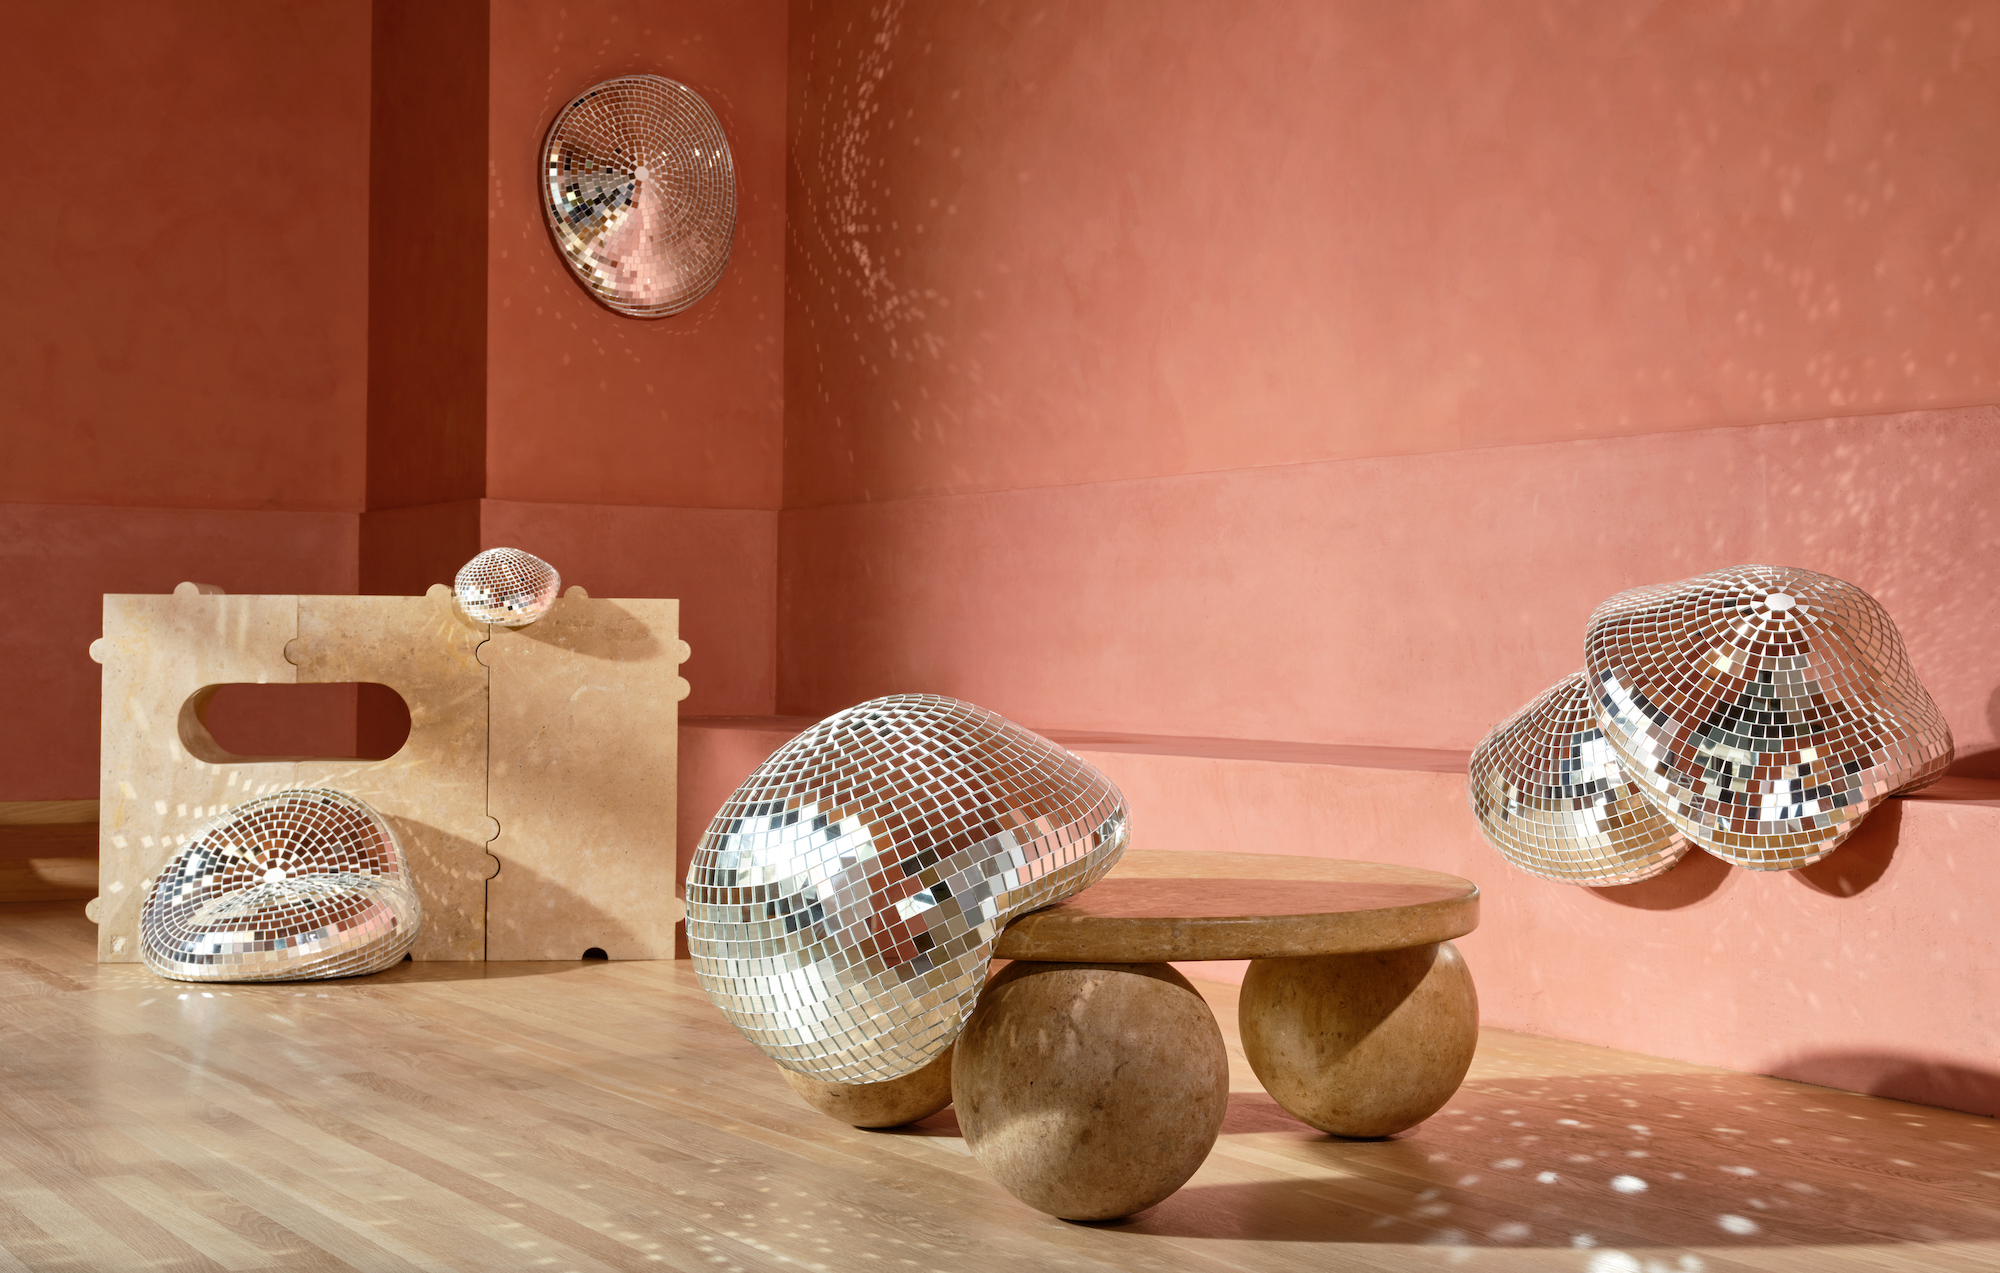 These Melted Disco Balls Embody the Chaos of a Club Night – SURFACE